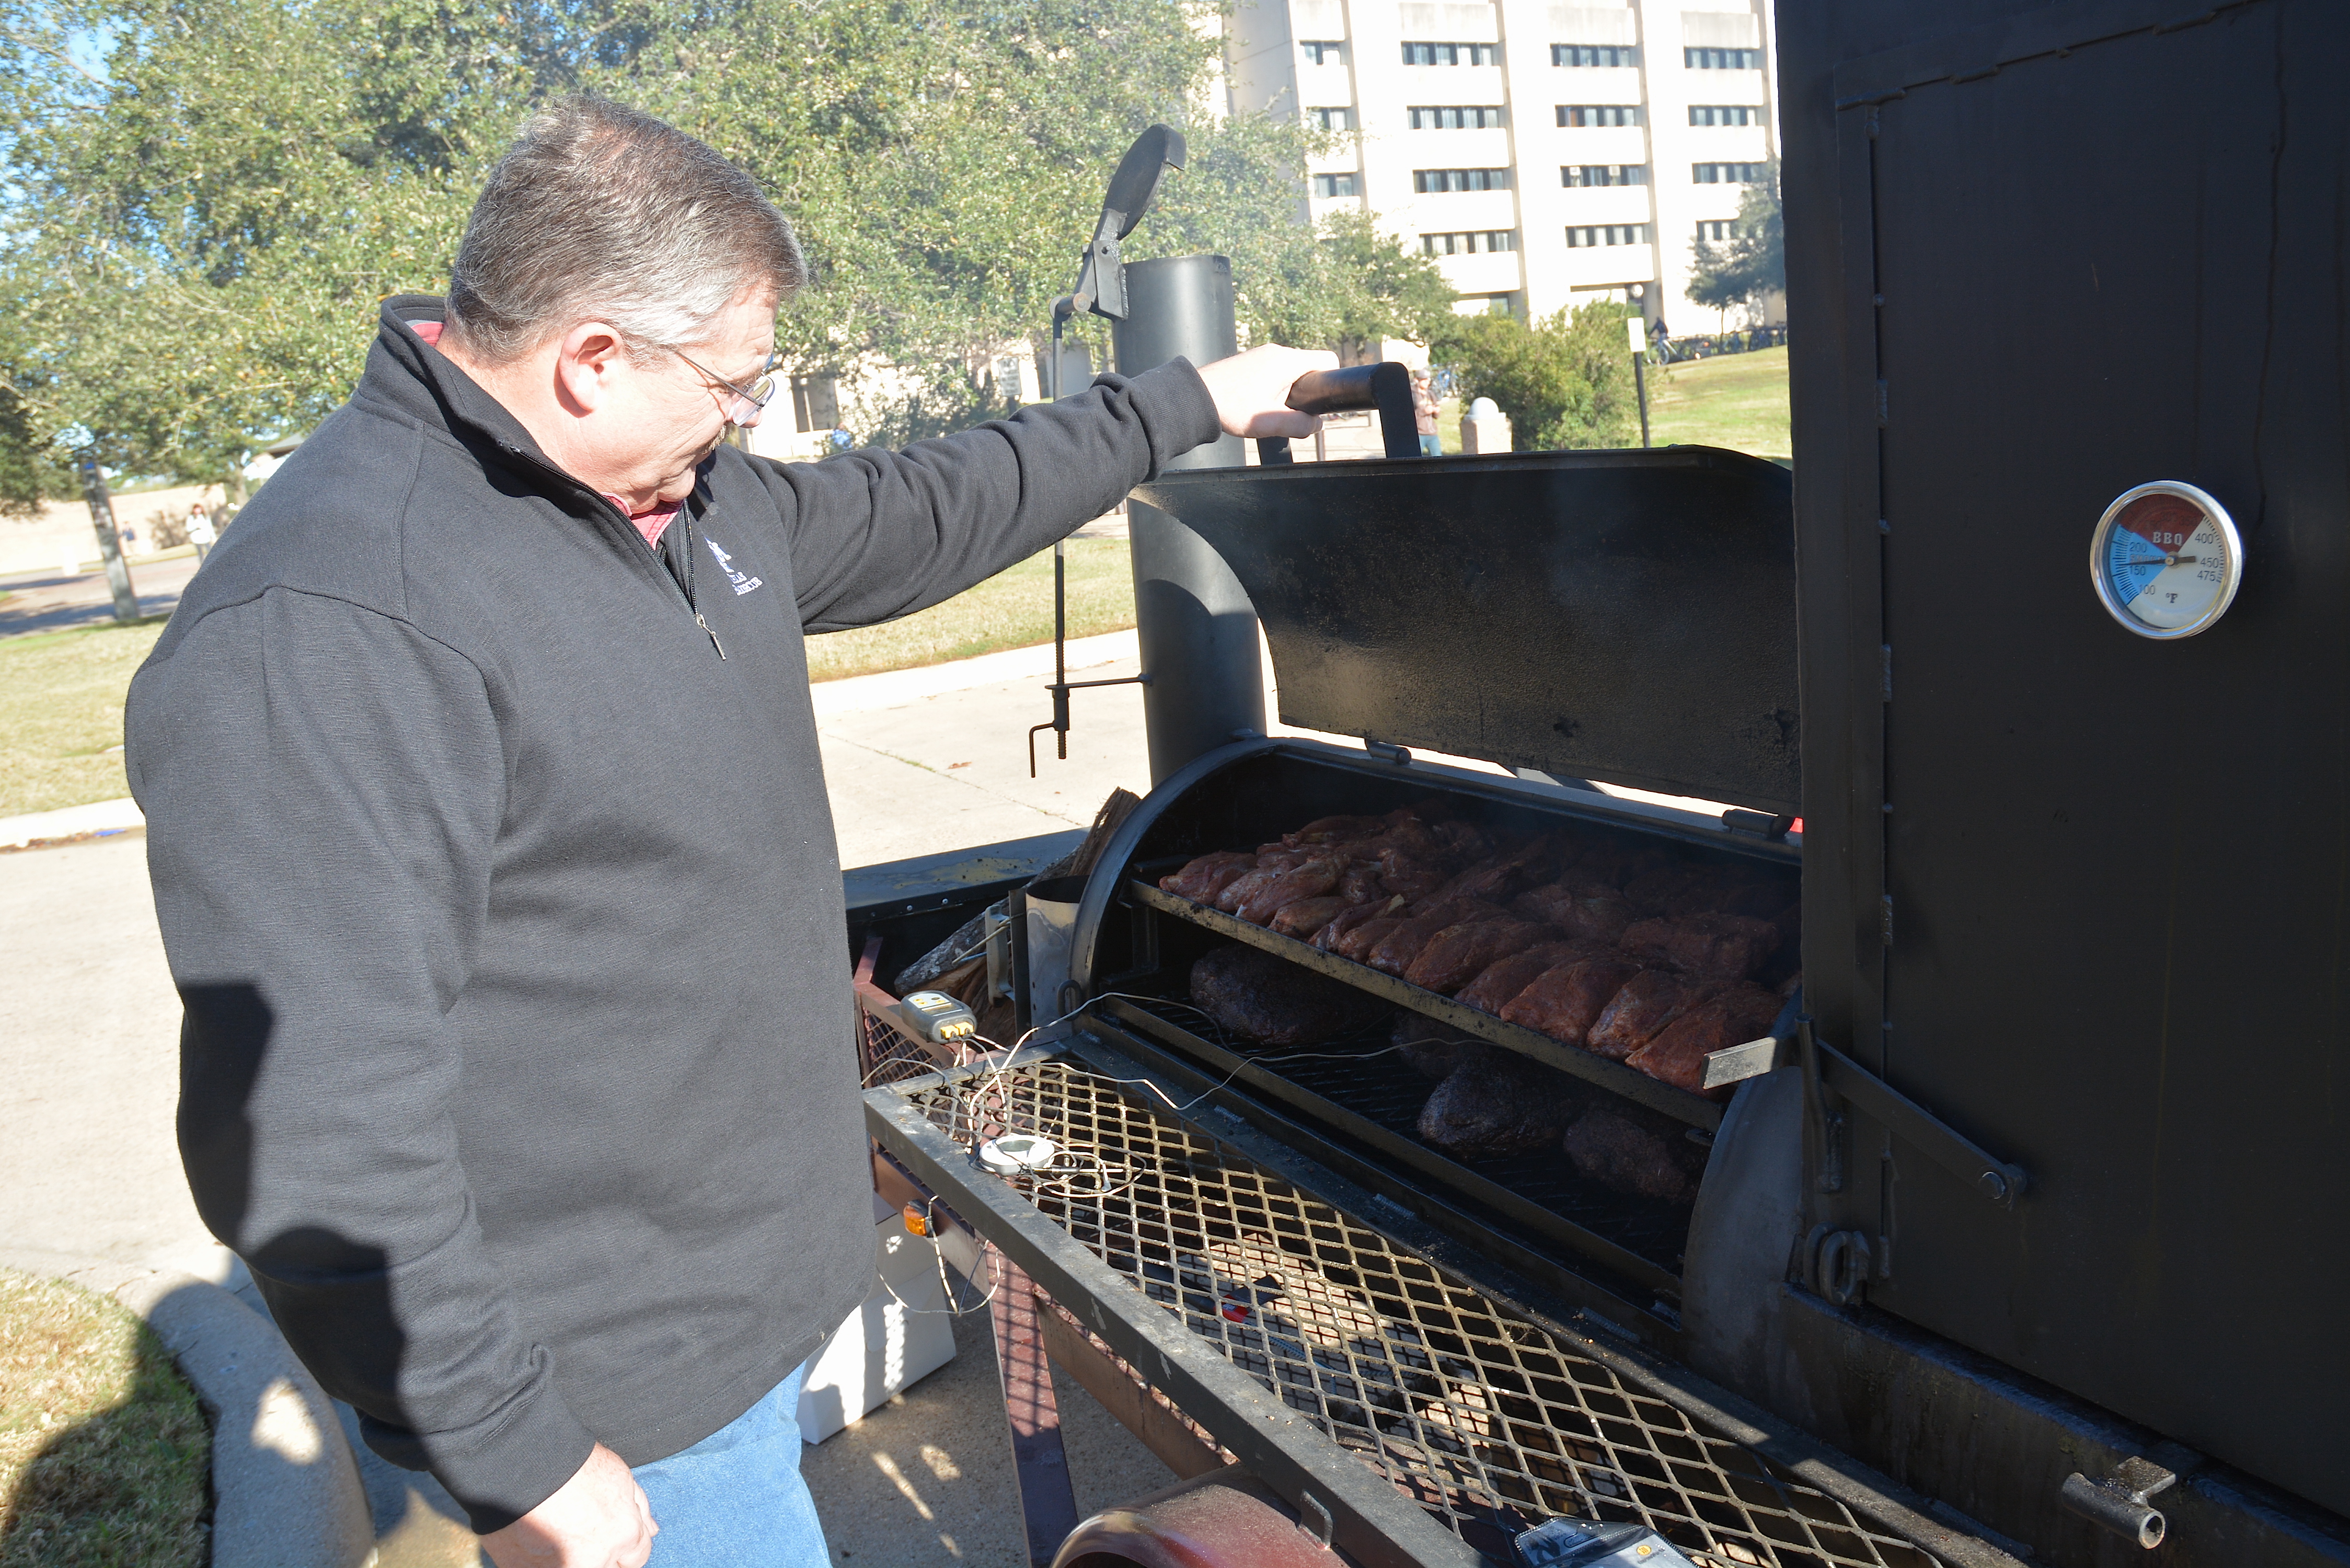 Dr. Griffin checks the meat on a barbecue pit.